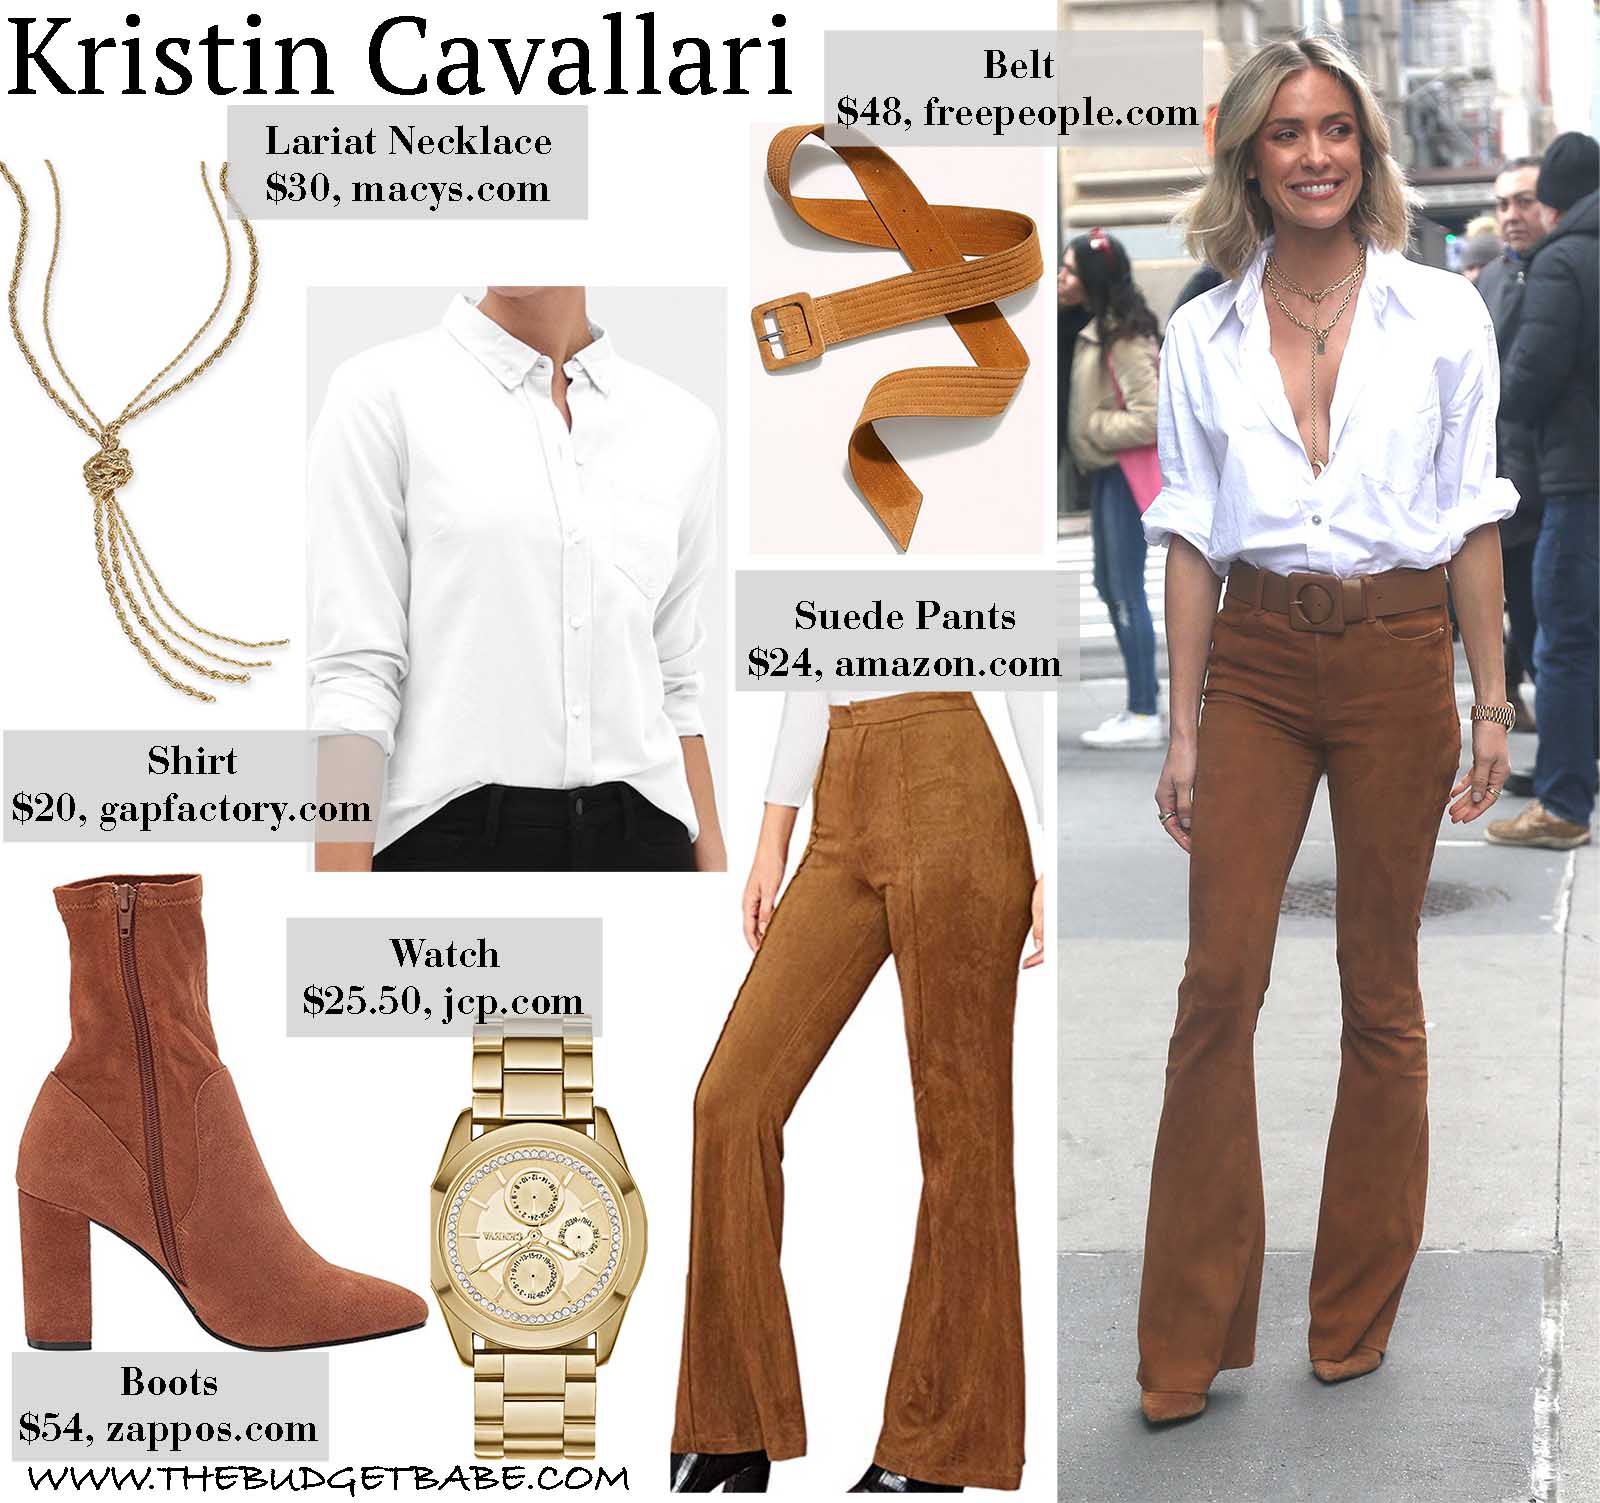 Kristin is 70's chic in suede bell pants!